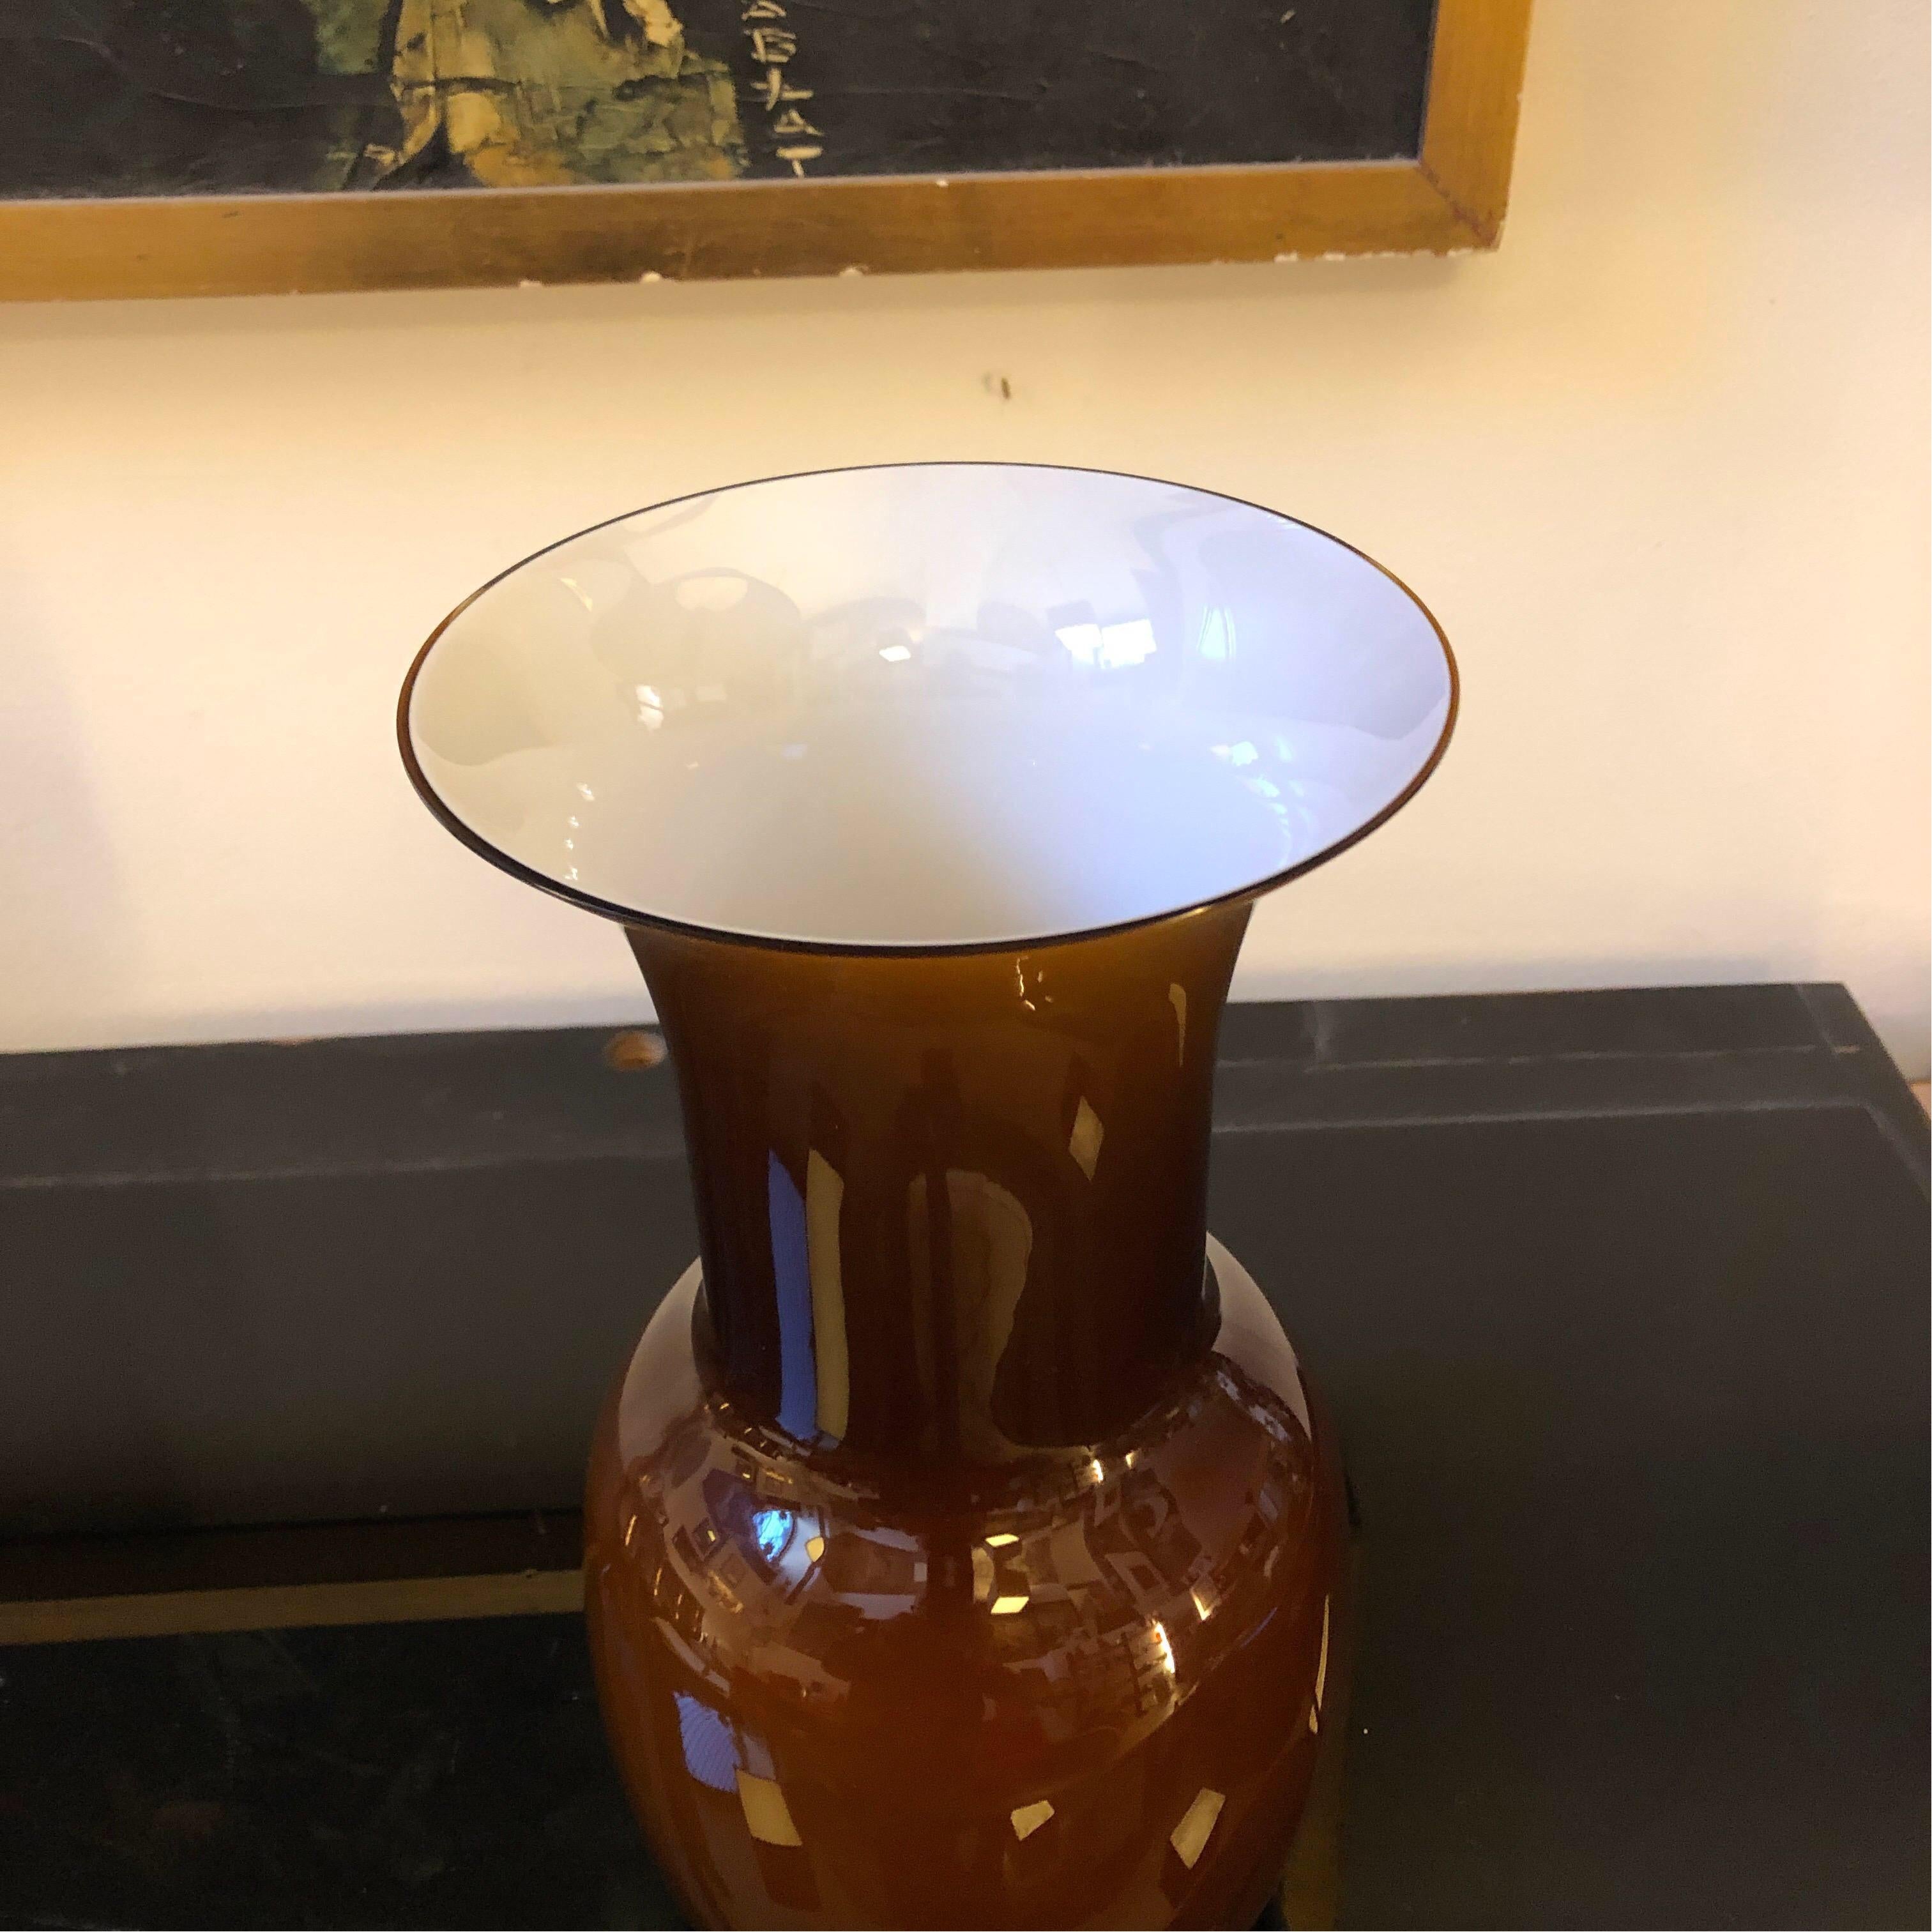 A brown and white opaline Murano glass vase by Aureliano Toso in the manner of Venini. It's made in 2000 and never used.